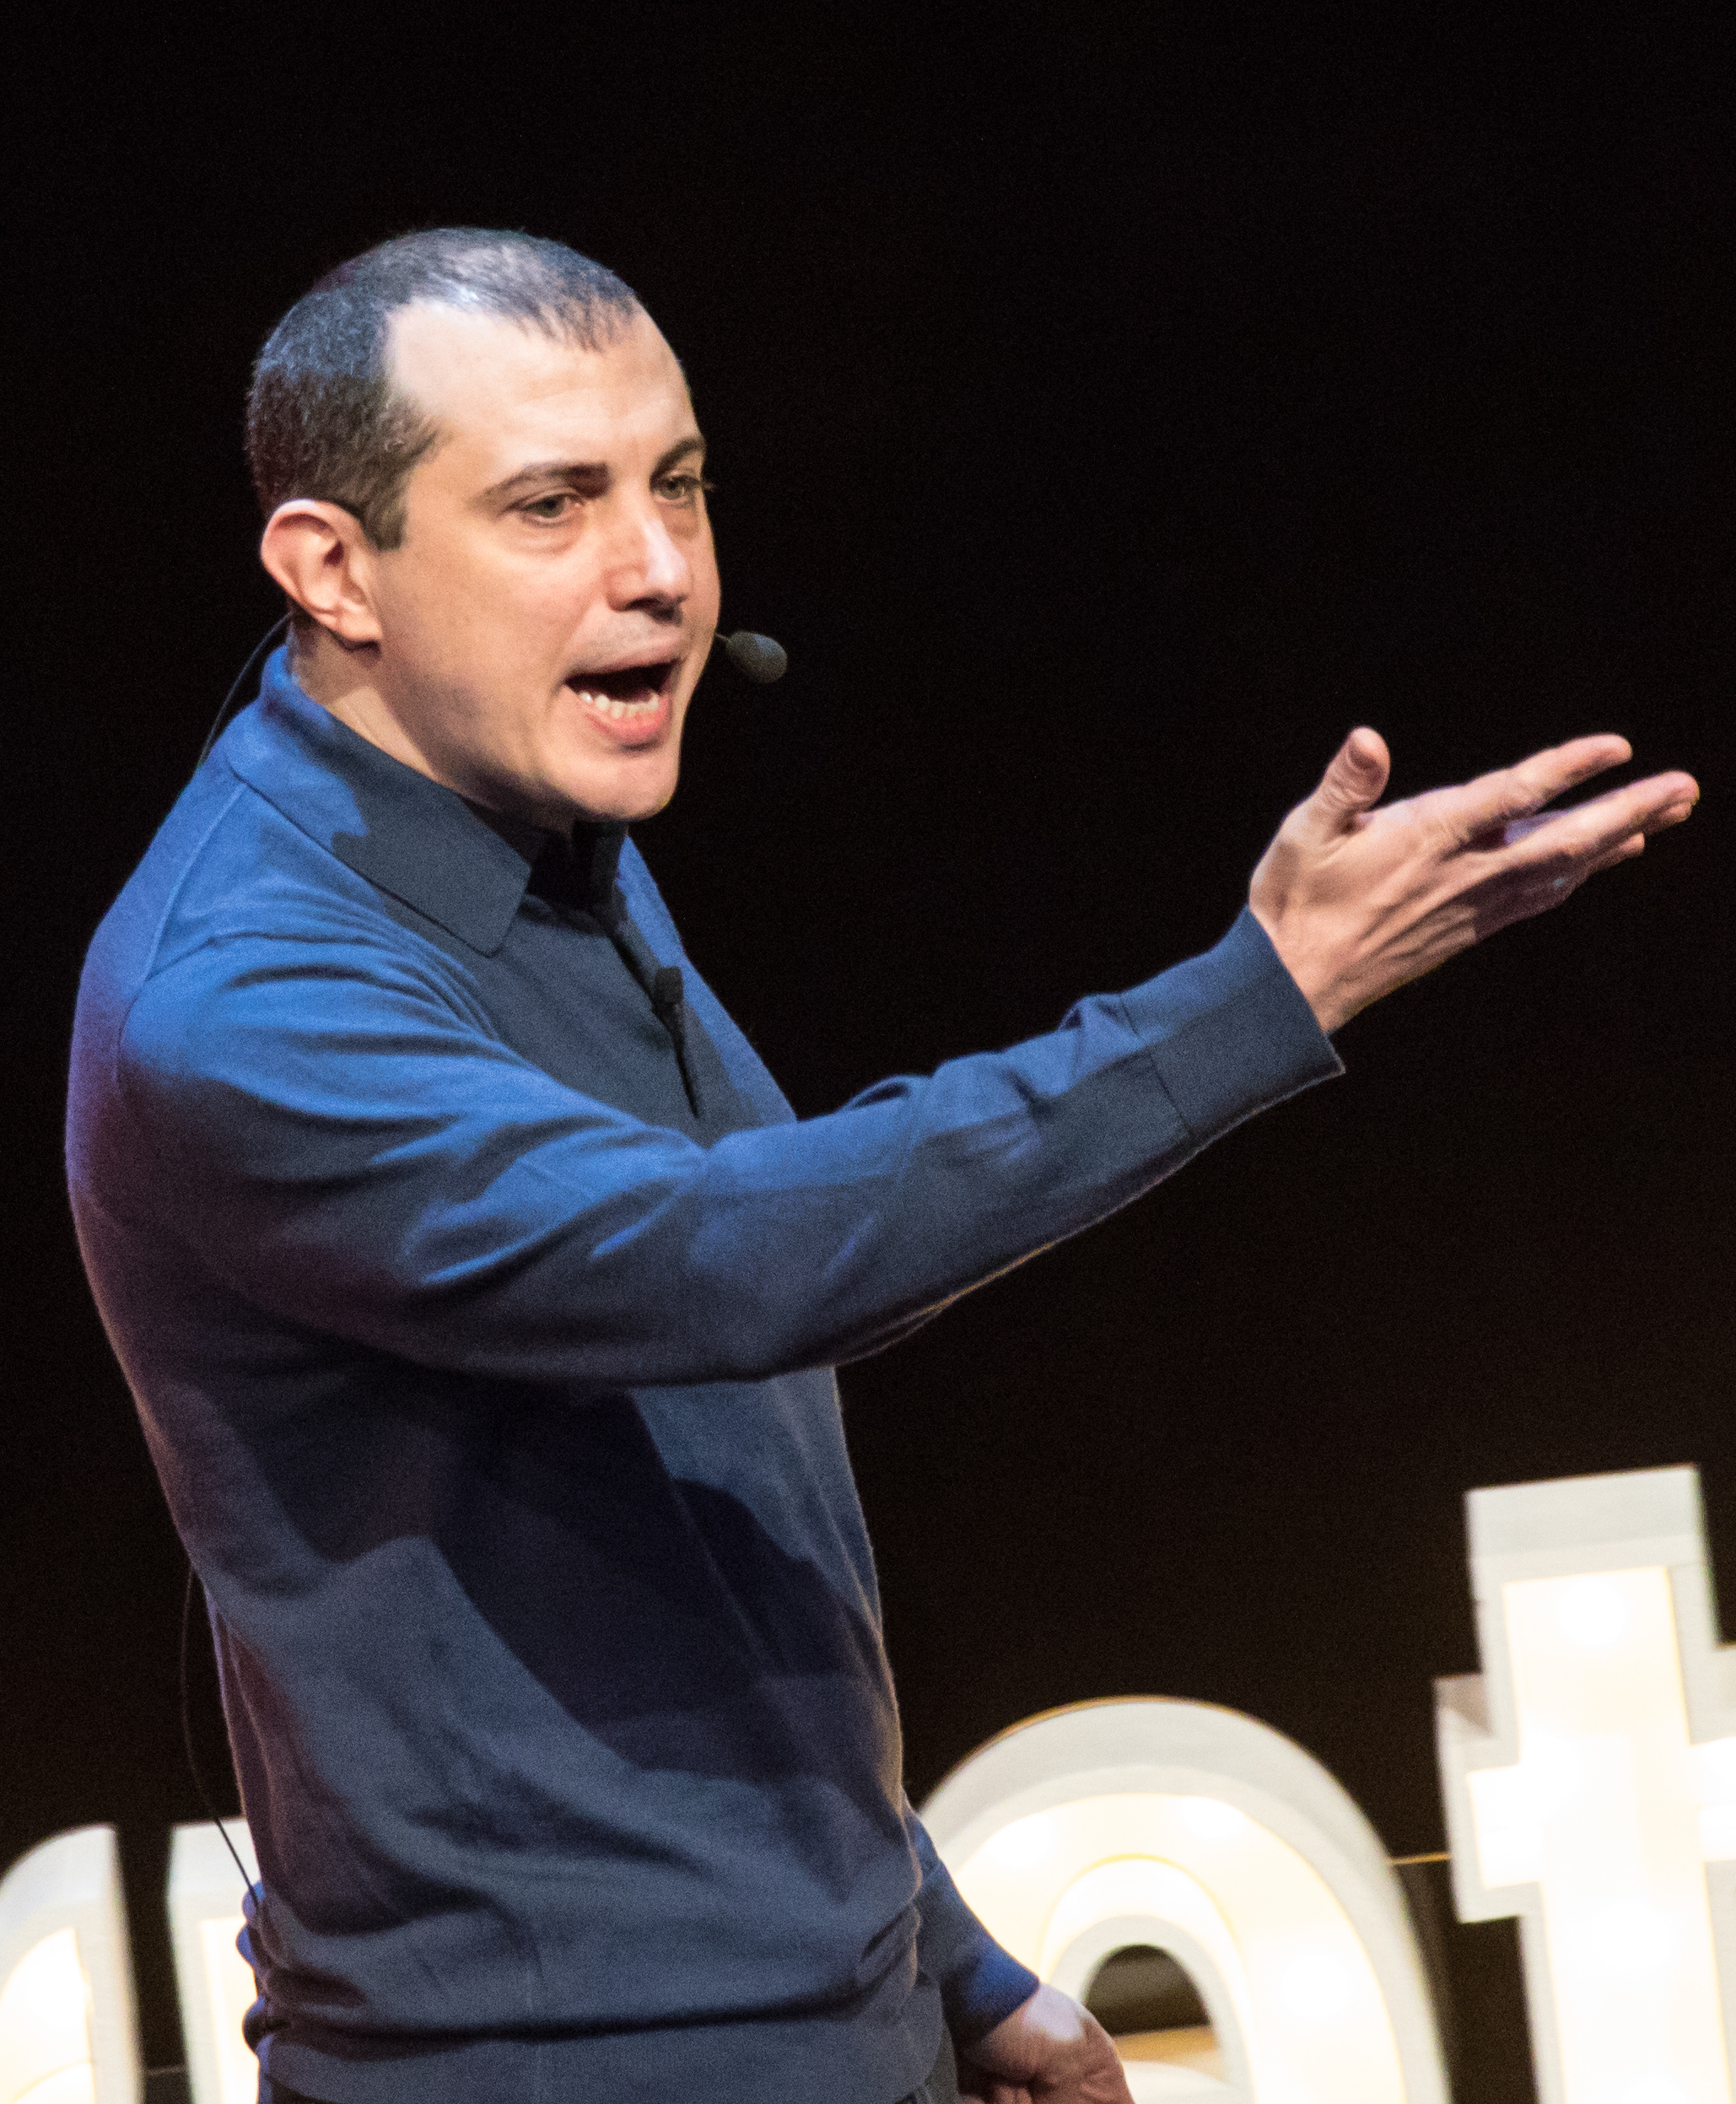 Andreas Antonopoulos got $ million in bitcoin donations after Roger Ver 